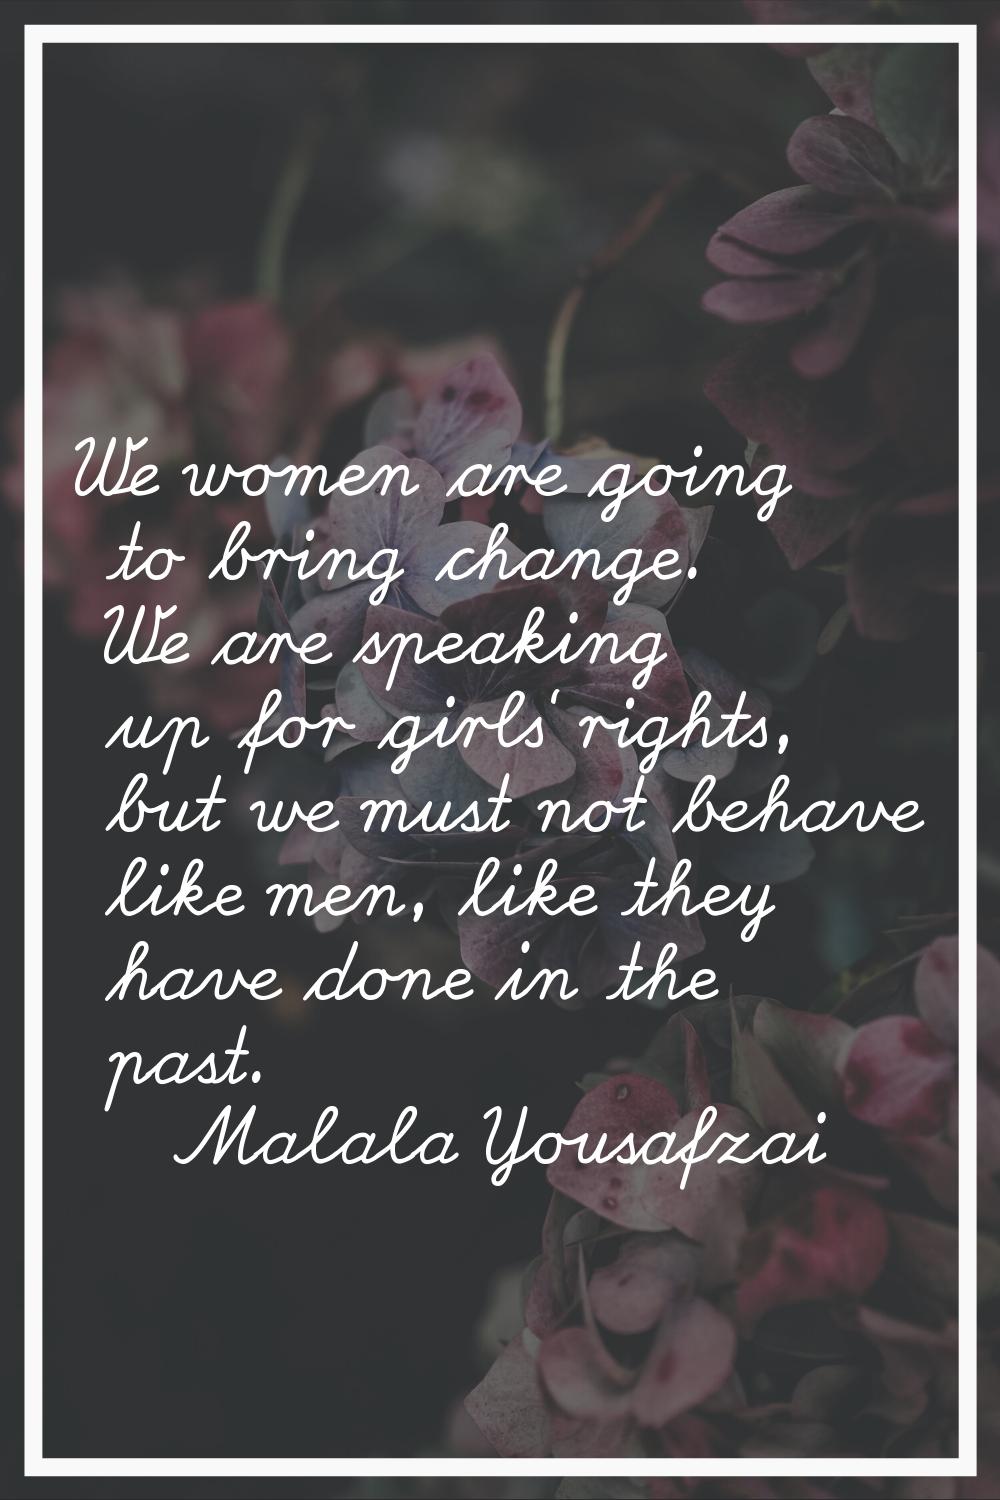 We women are going to bring change. We are speaking up for girls' rights, but we must not behave li